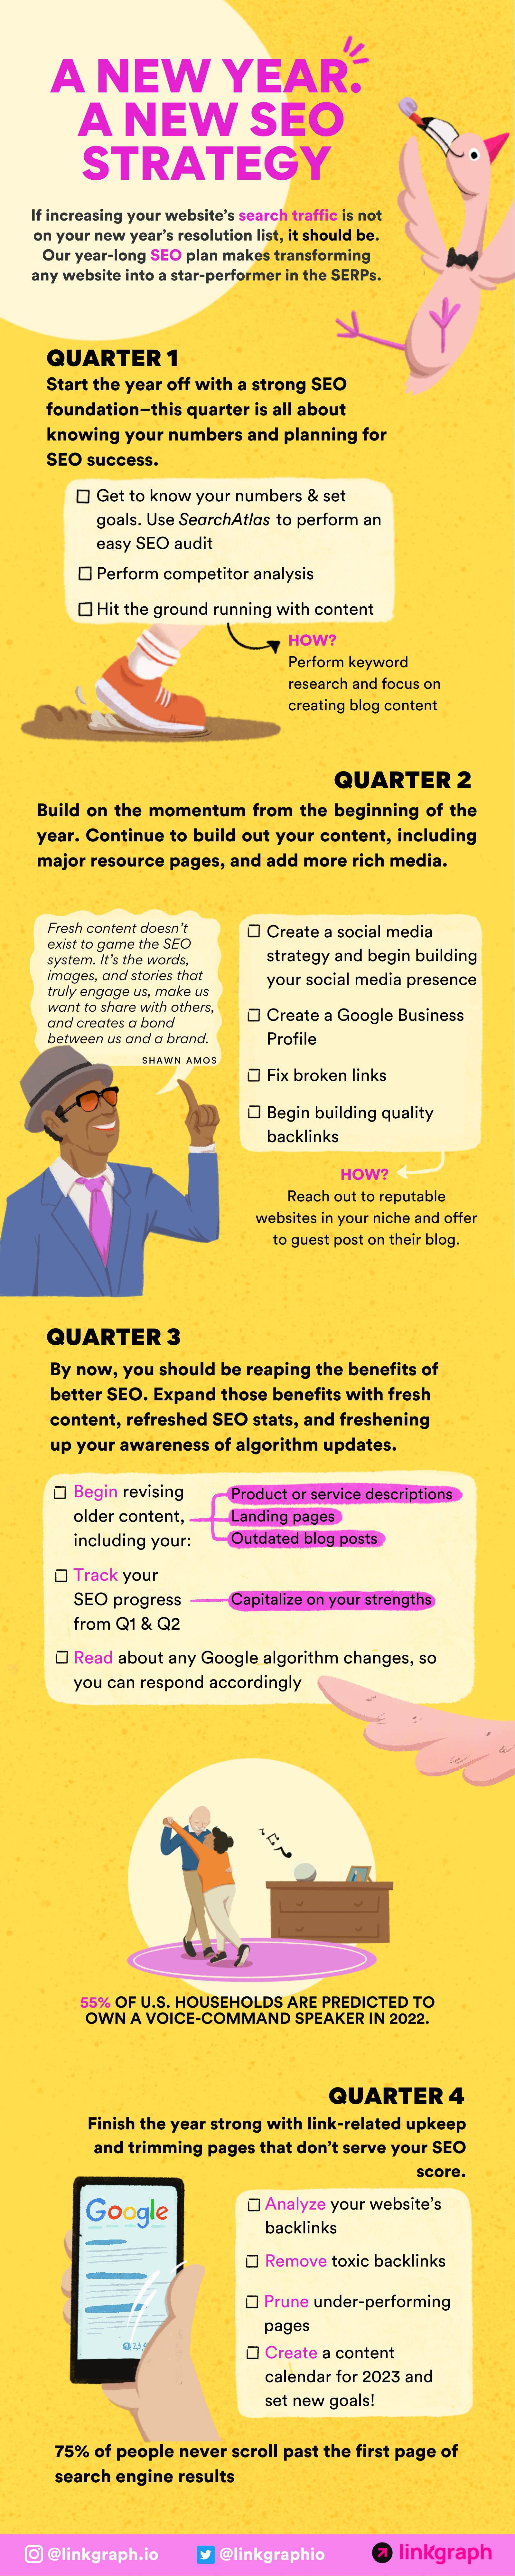 Infographic showing a new year a new SEO strategy